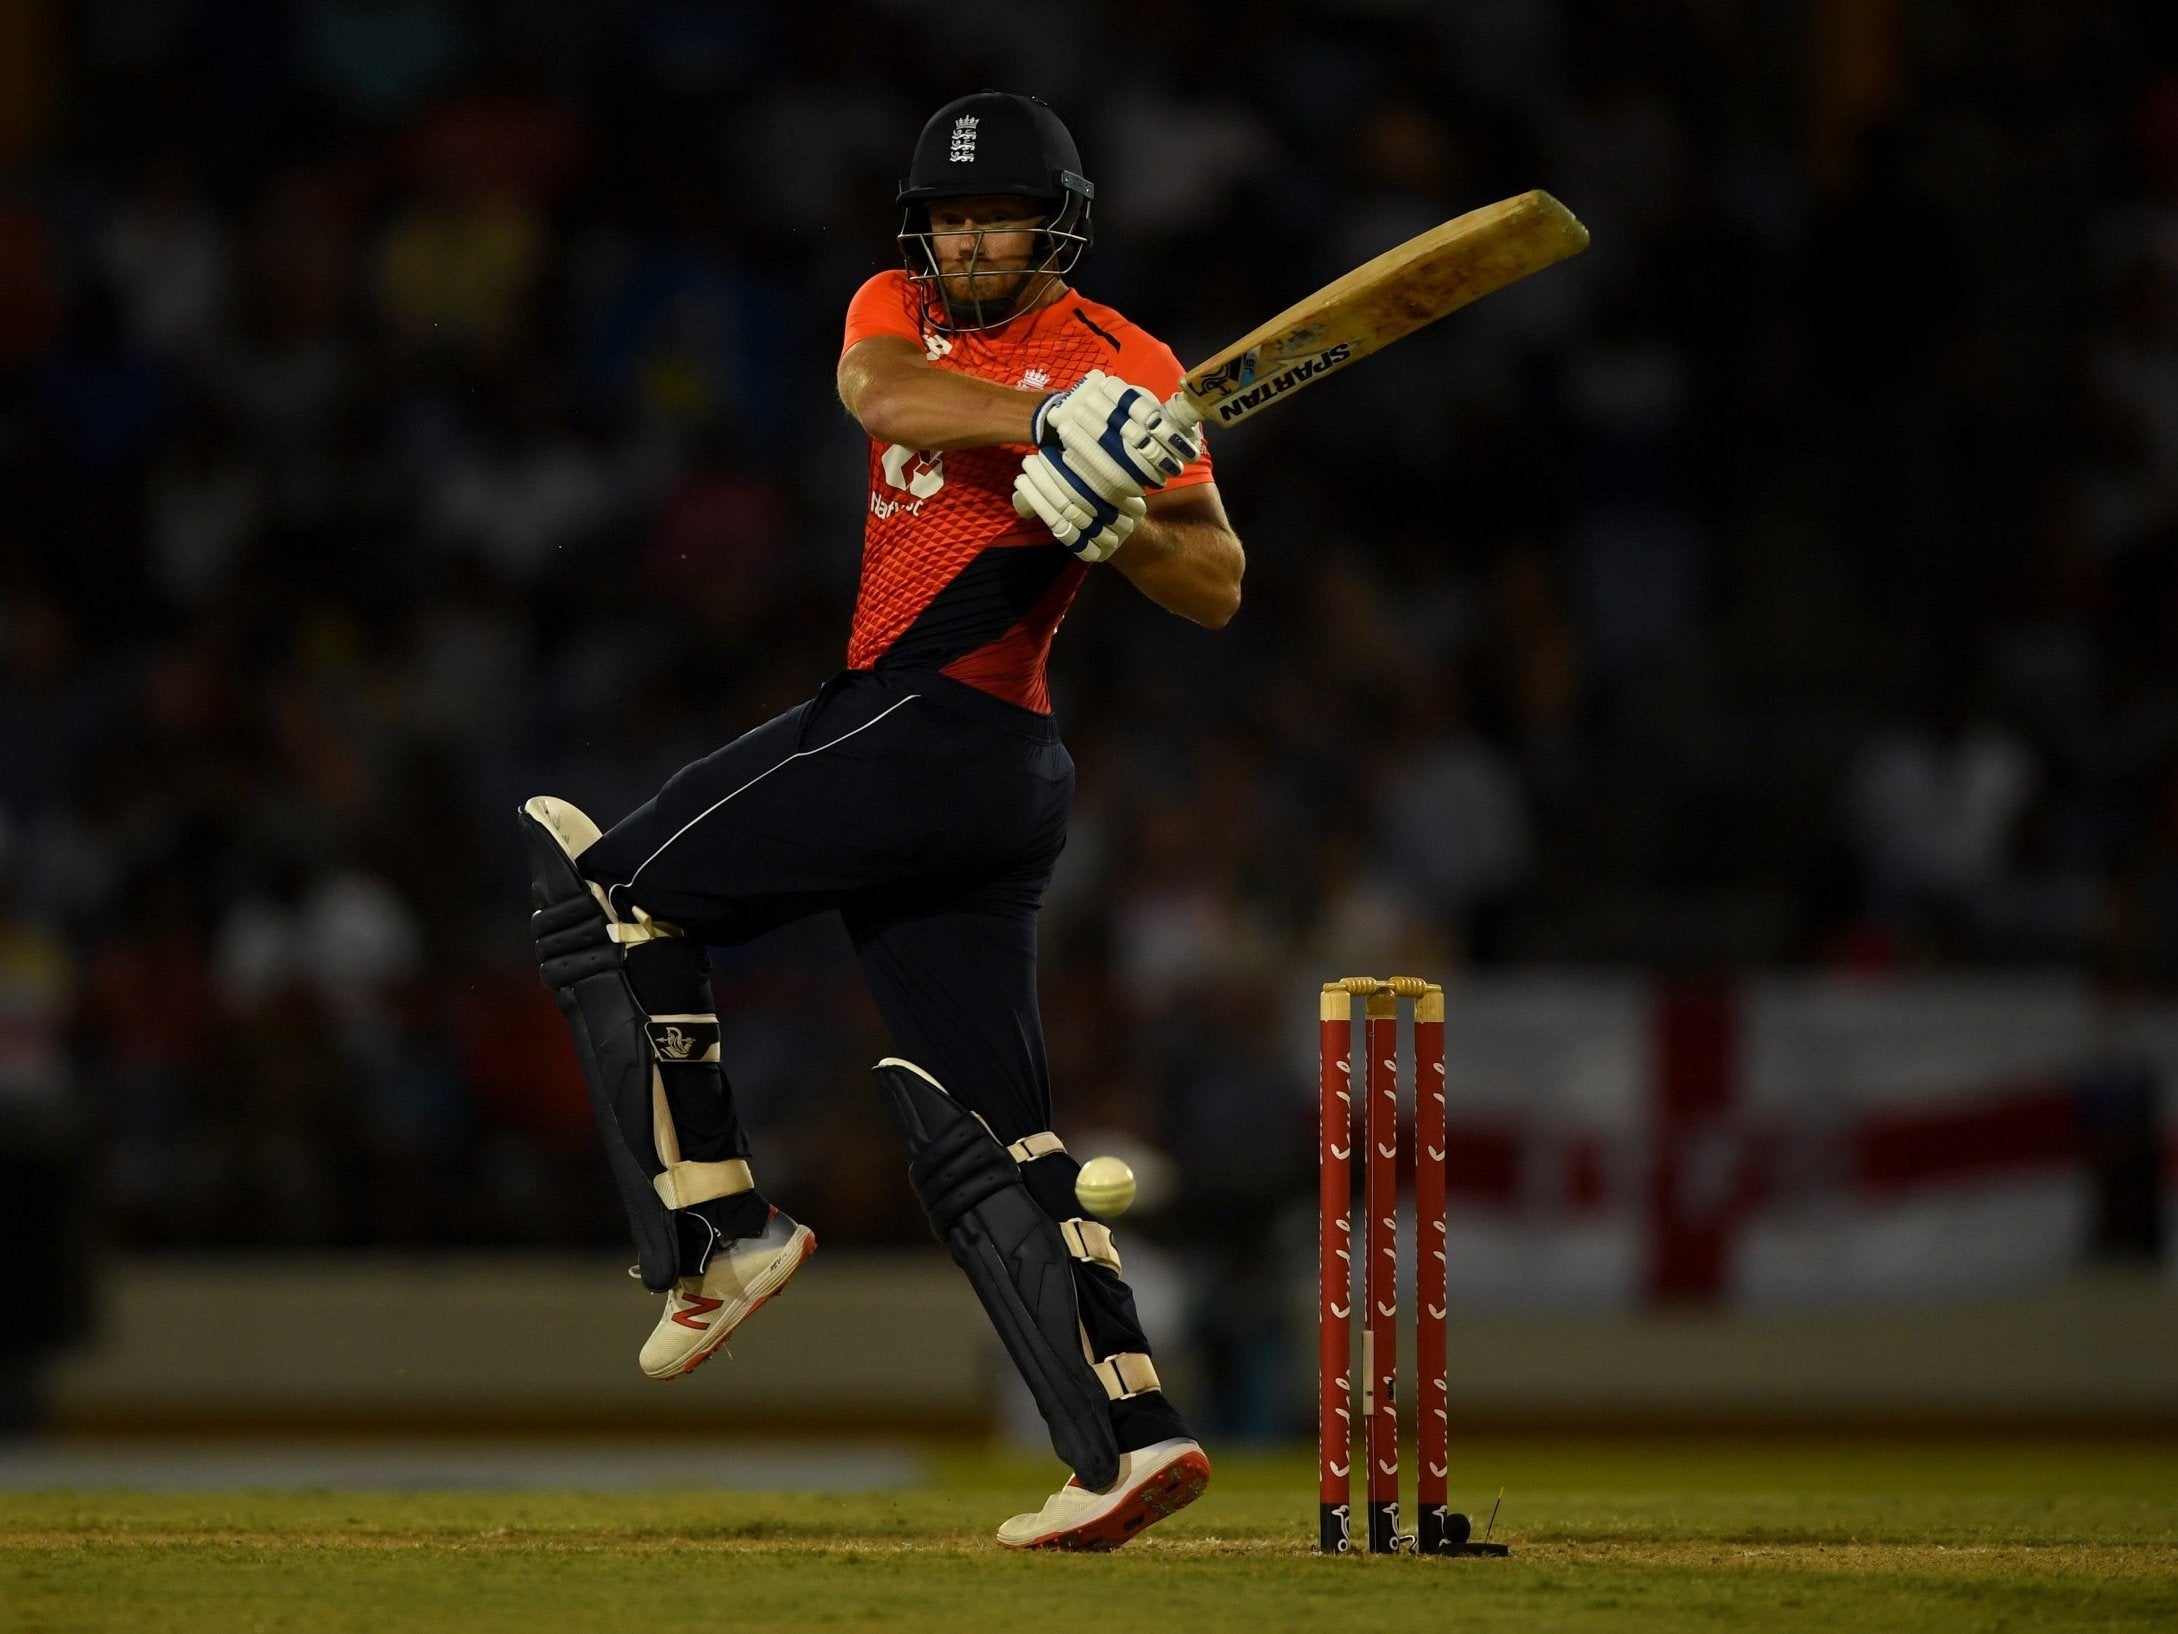 Jonny Bairstow enjoyed batting higher up the order after leading England to victory over the West Indies